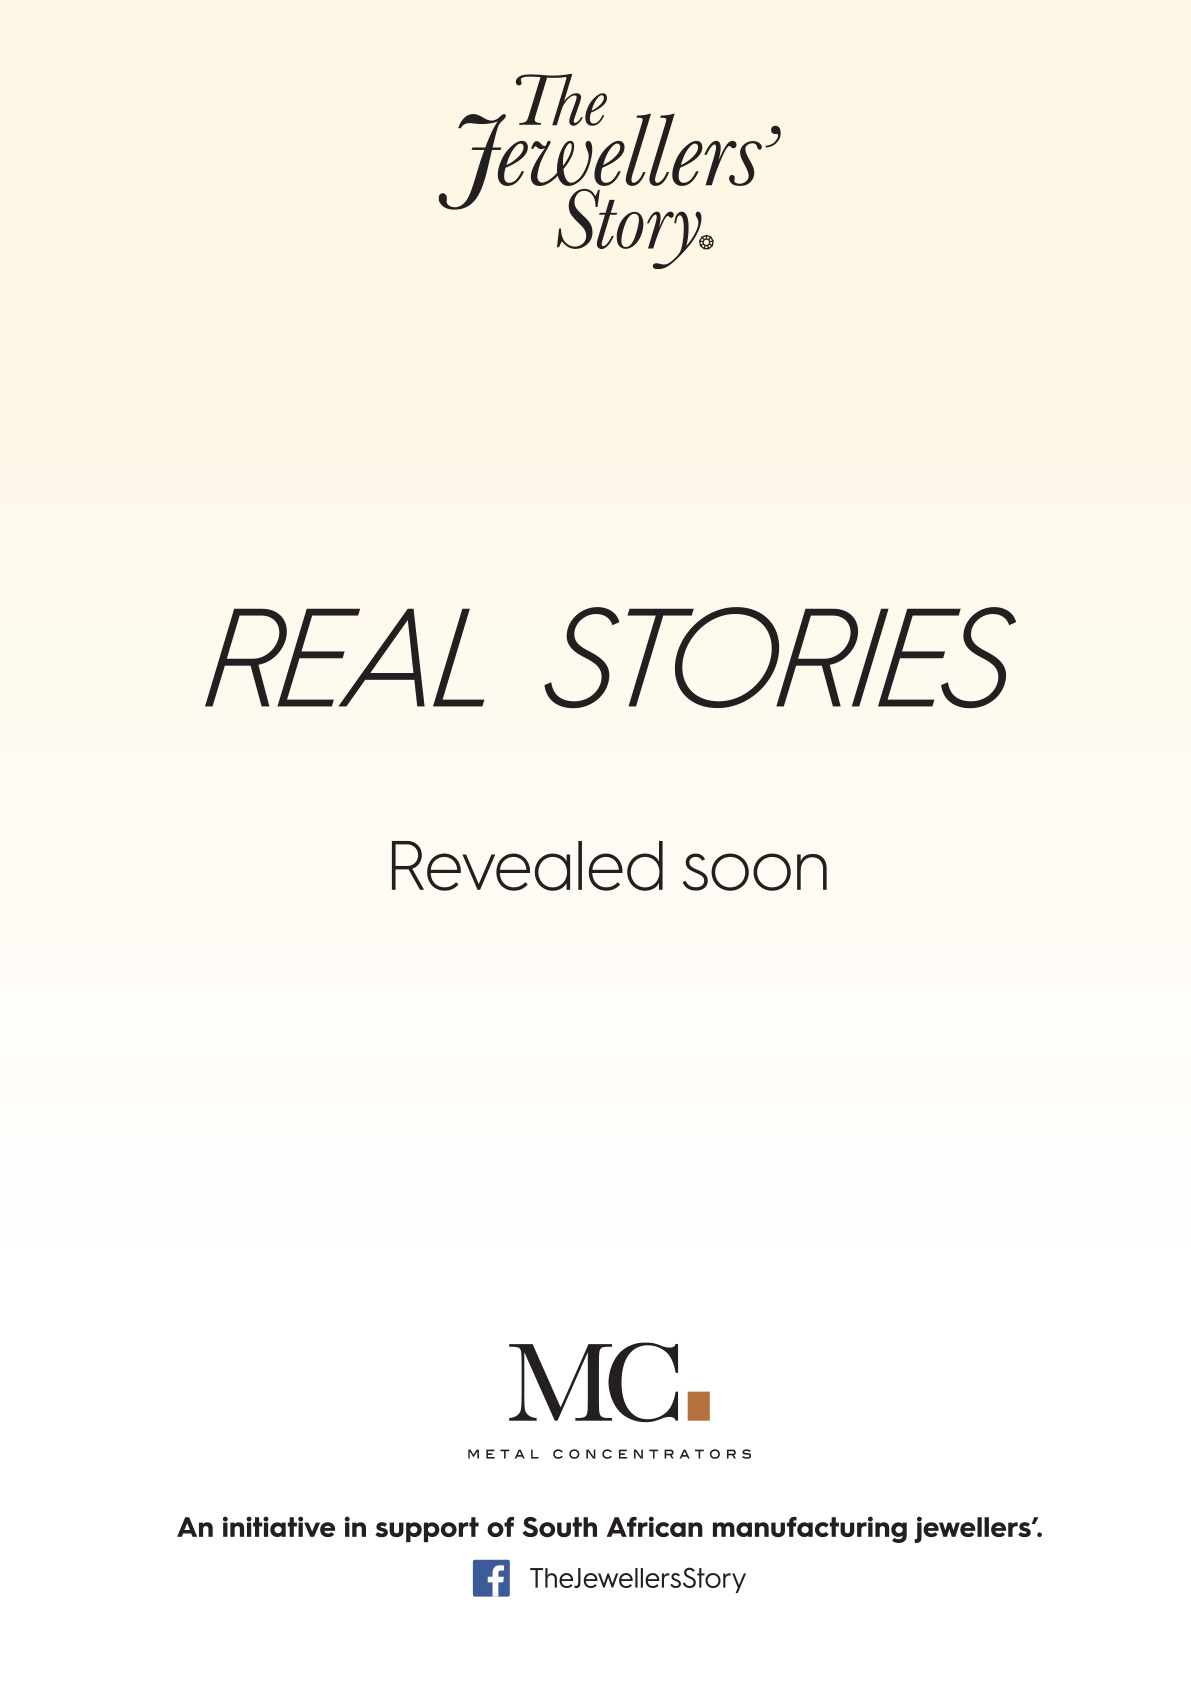 Real Stories coming soon